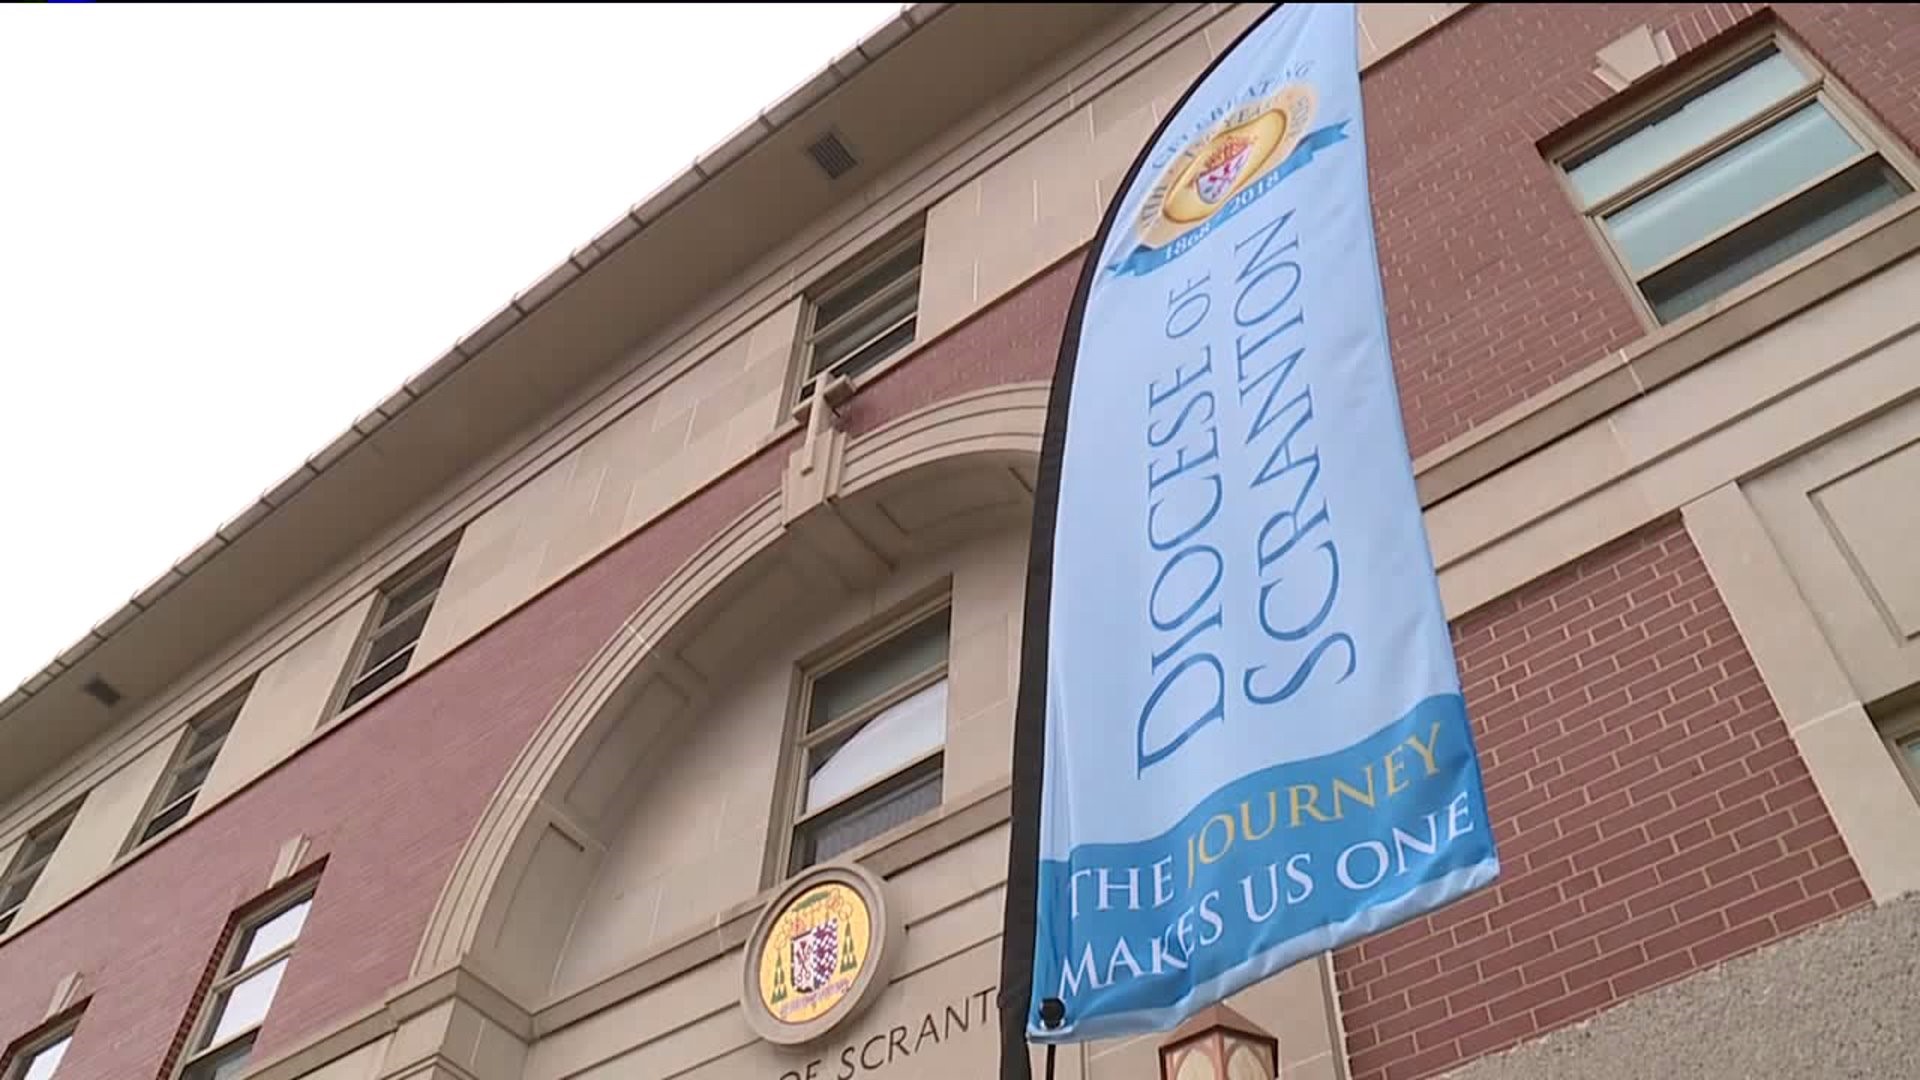 One Year Later: Diocese of Scranton's Response to Abuse Report